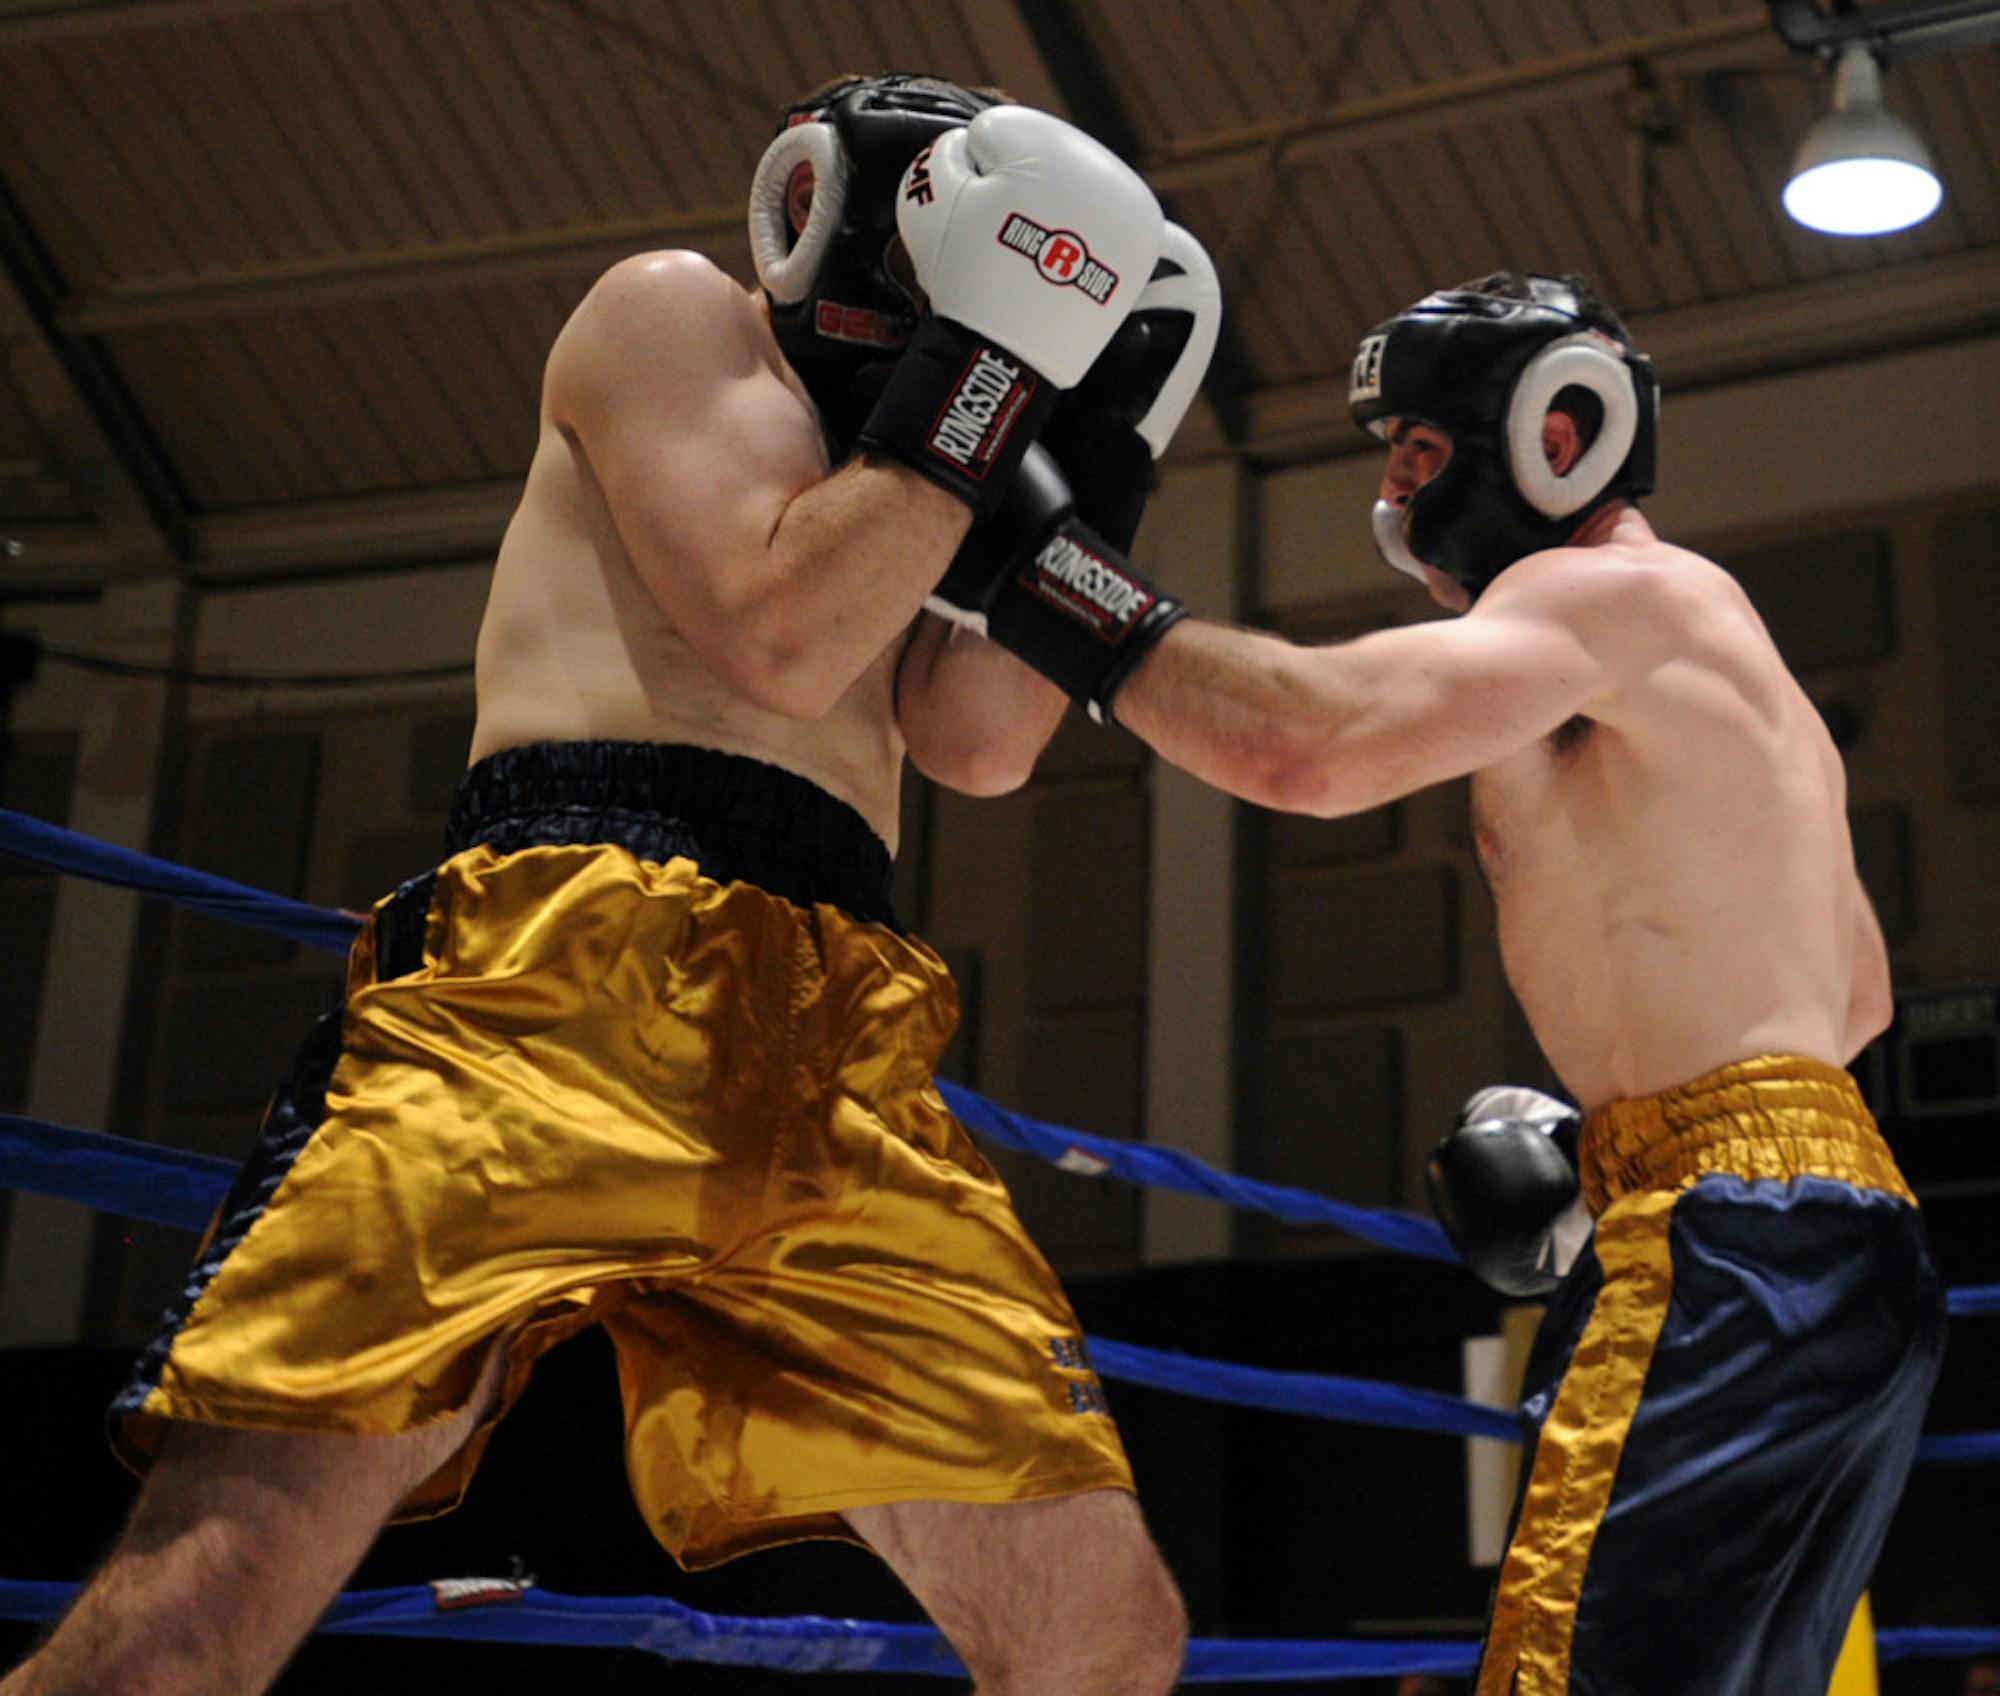 Senior Lucas Sullivan, right, fights in the 2014 Bengal Bouts at Joyce Fieldhouse on Feb. 17, 2014. Sullivan missed this year’s tournament.